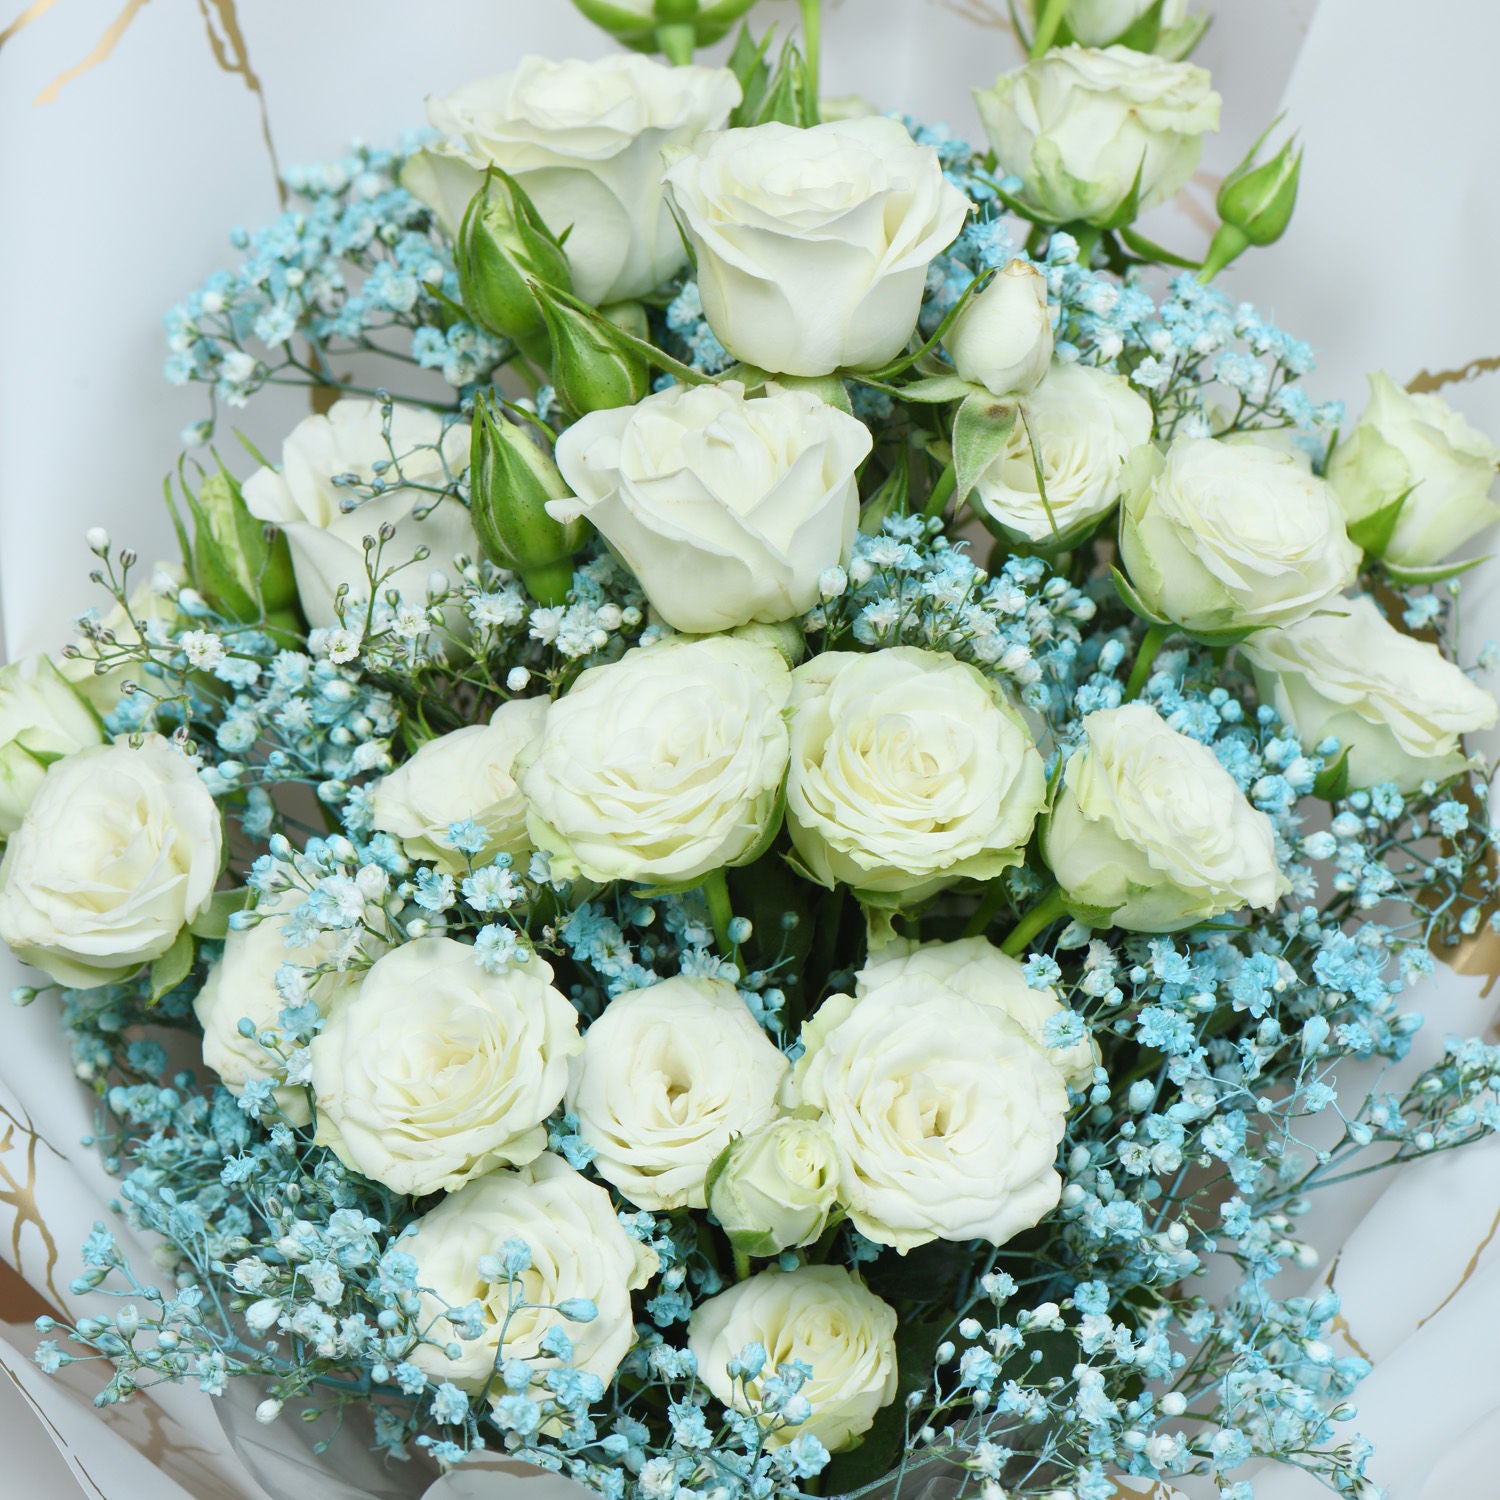 Elegance White Roses Bouquet with Cake